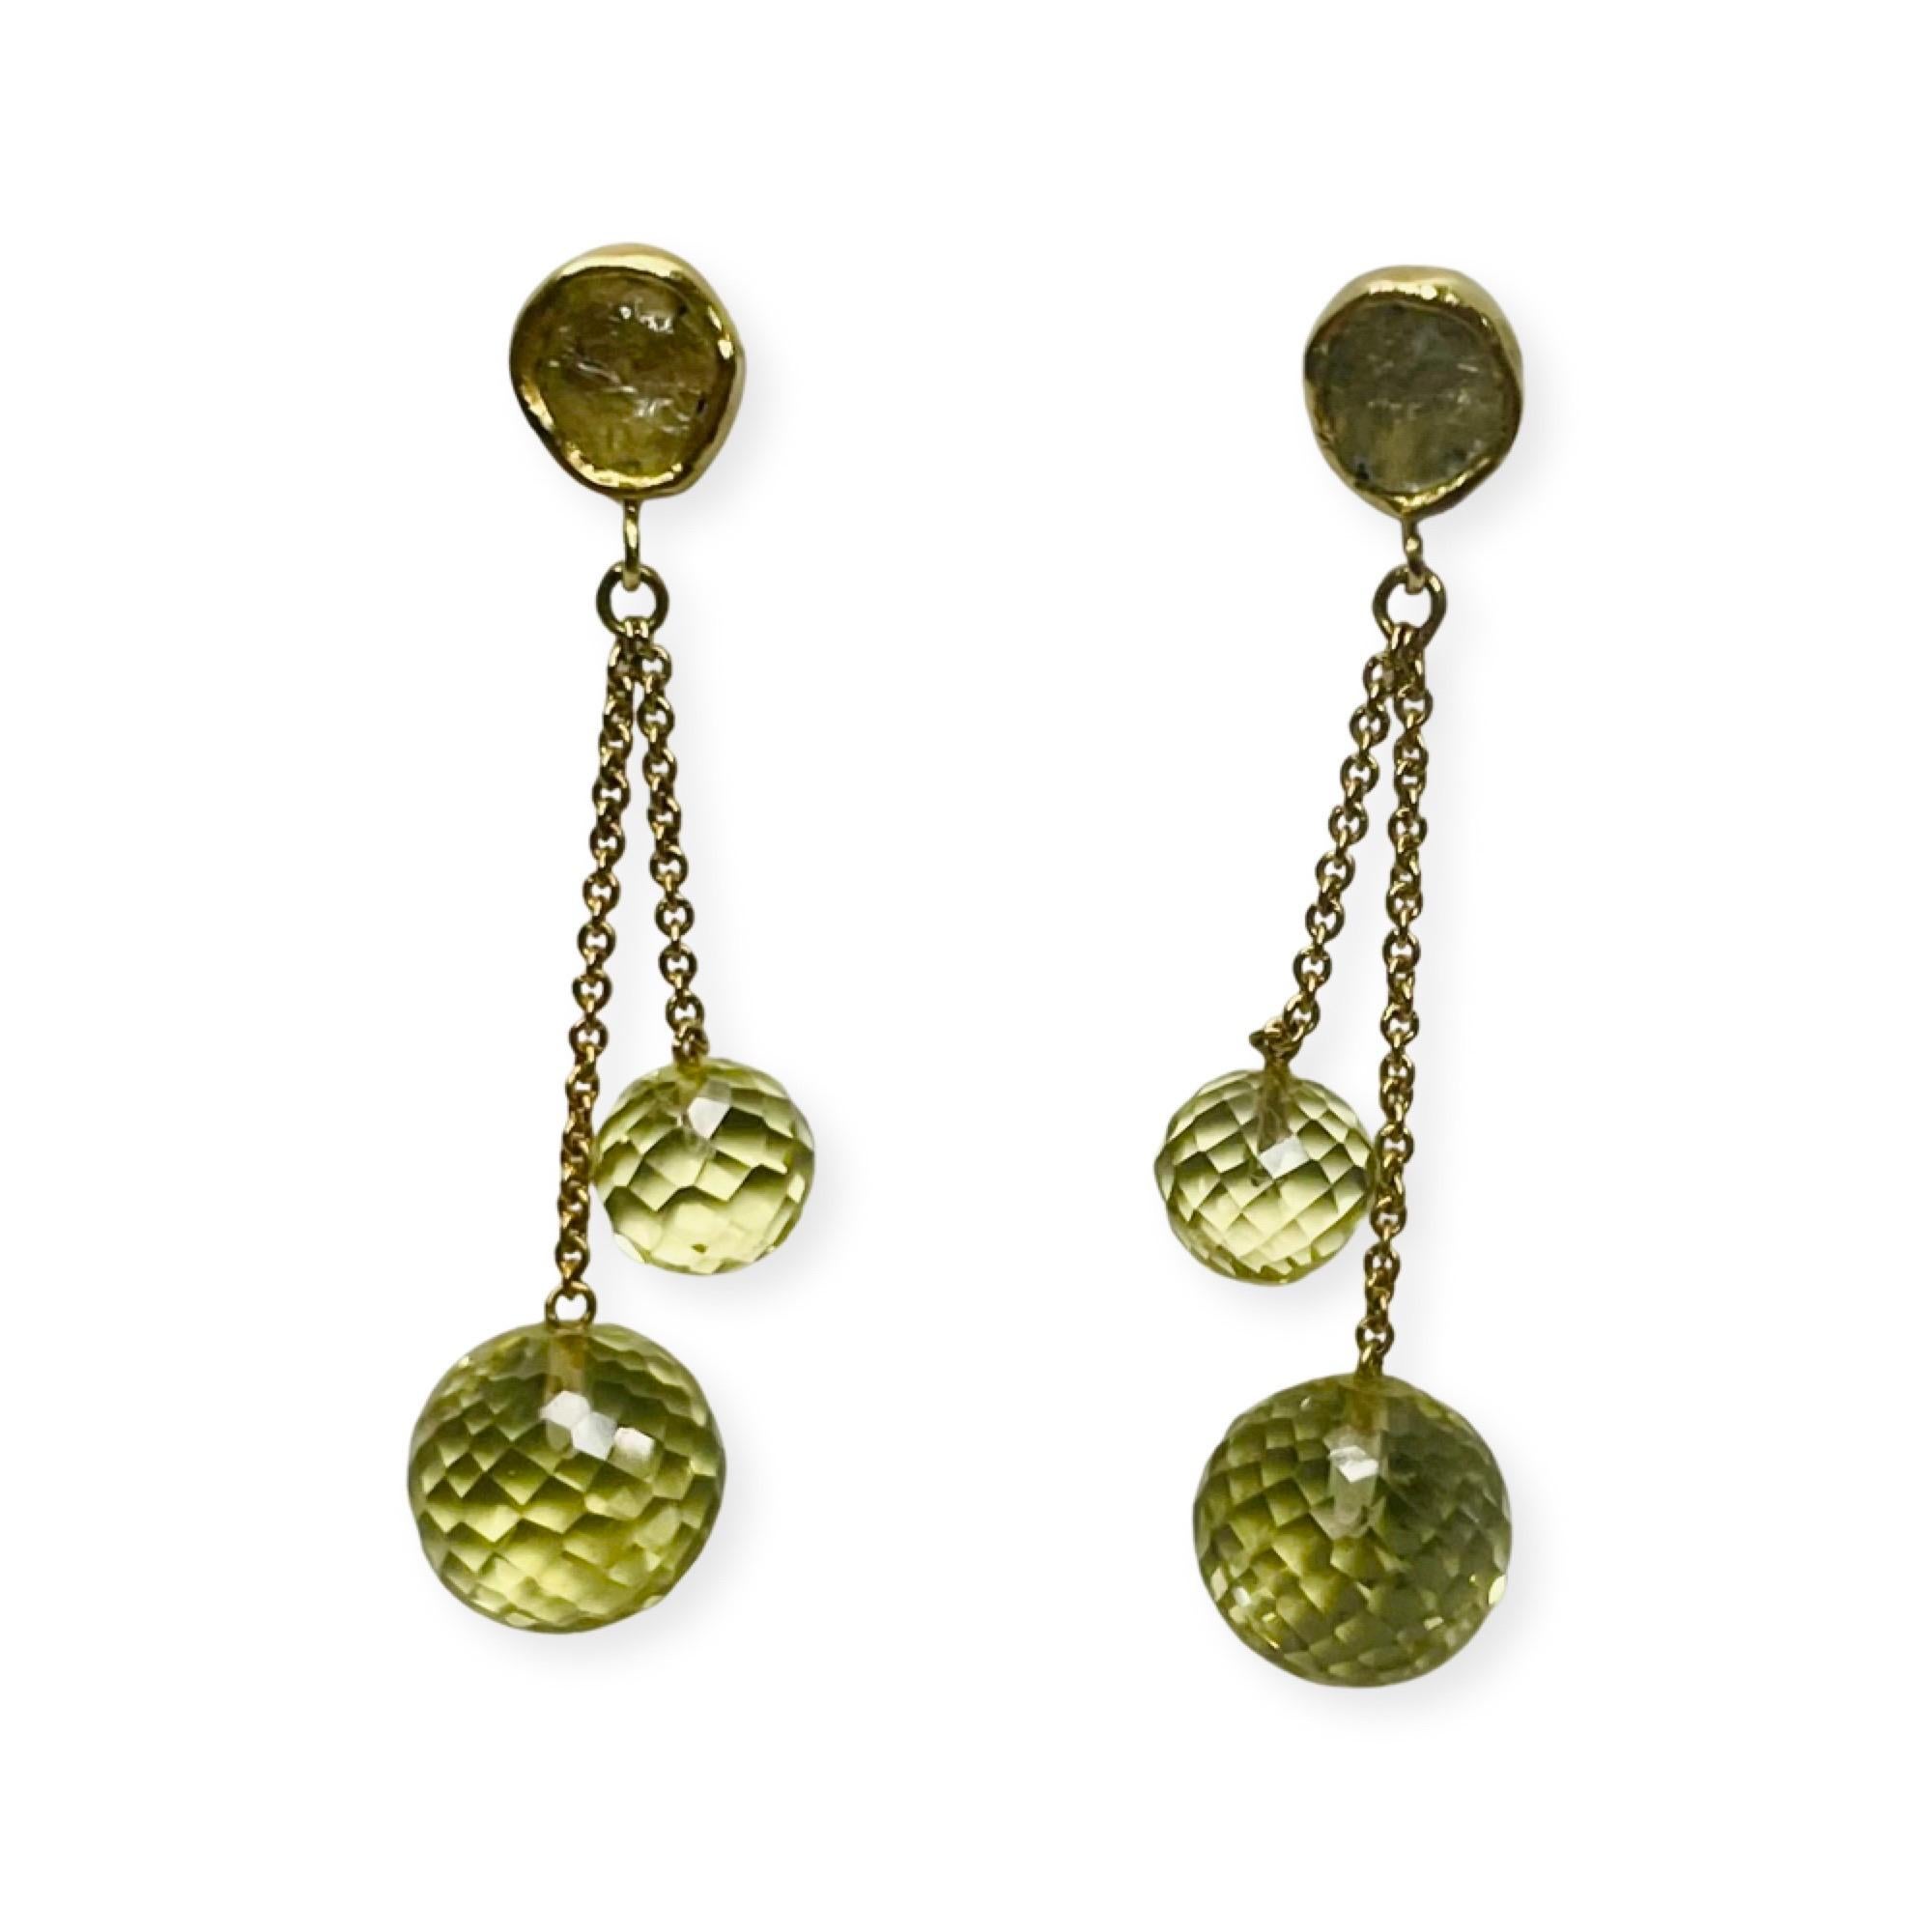 Lithos 18K Yellow Gold Montana Sapphire Rough and Faceted Peridot Earrings. There is a total rough Montana sapphire weight of 1.41 carats. They are bezel set in 18KY gold. The four, peridot faceted balls, dangle on 1.0 mm 18KY gold cable style